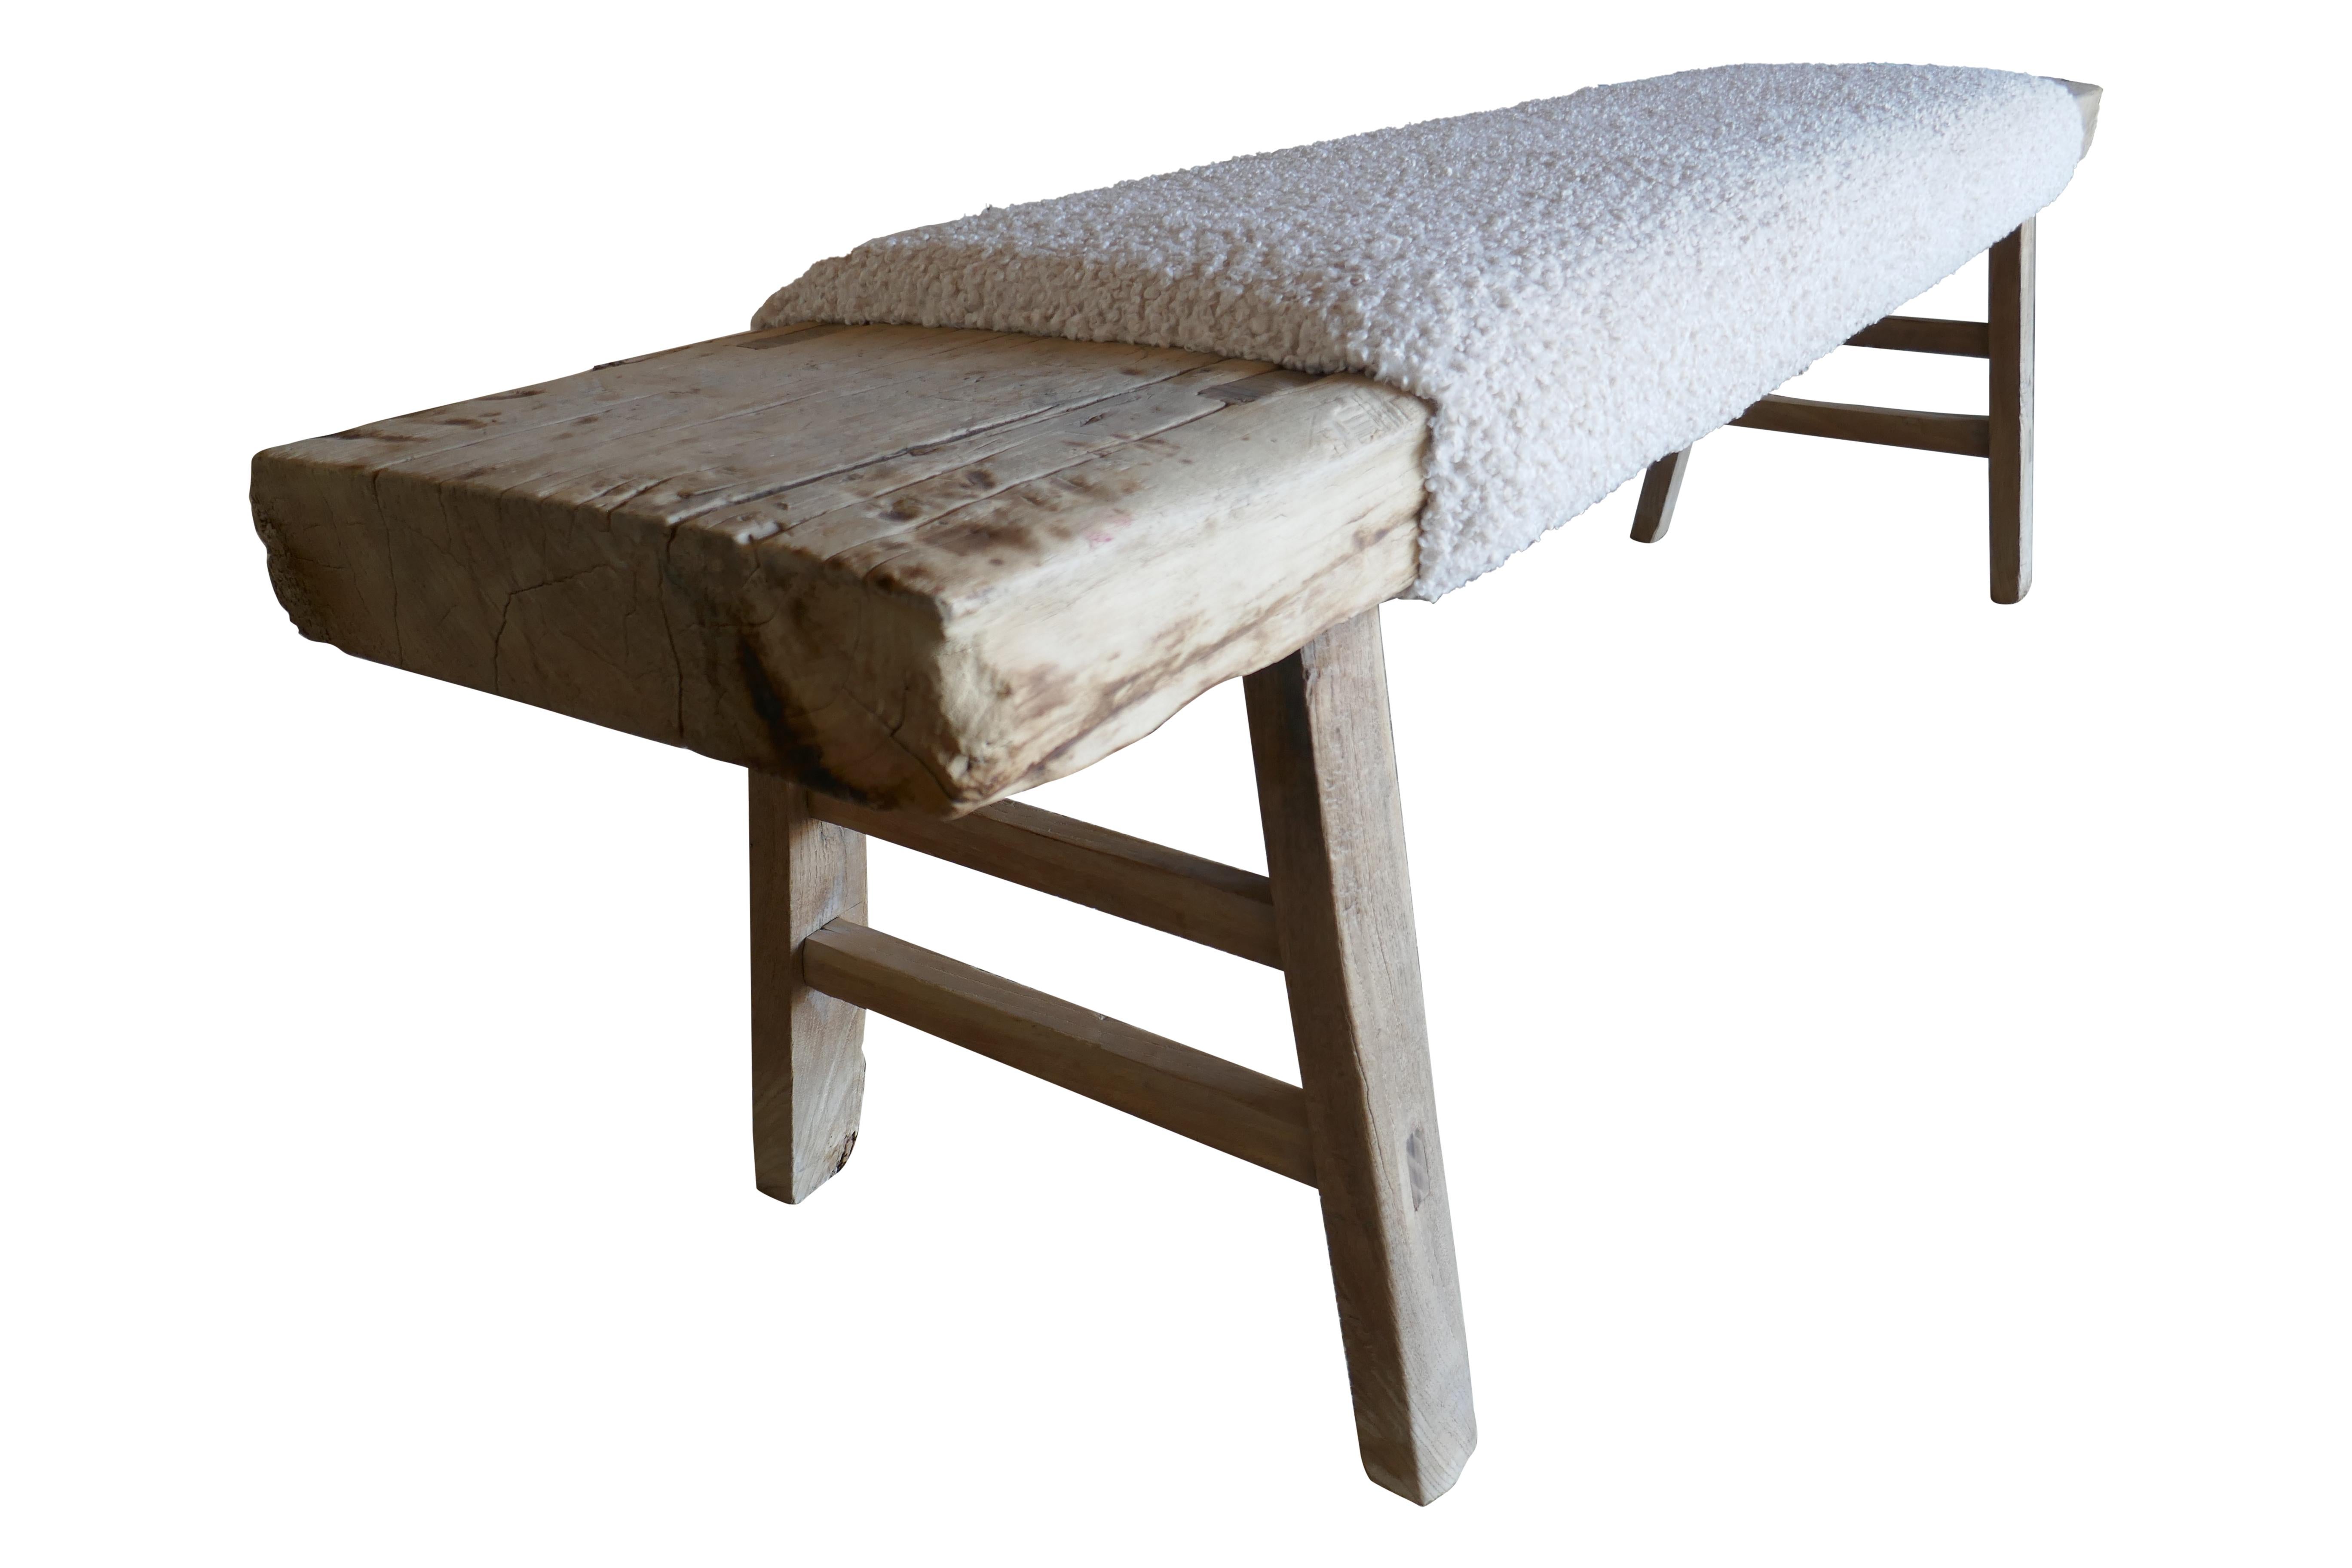 FI Vintage Shandong Elmwood Bench w/ Luxe Cream White Shearling  For Sale 2